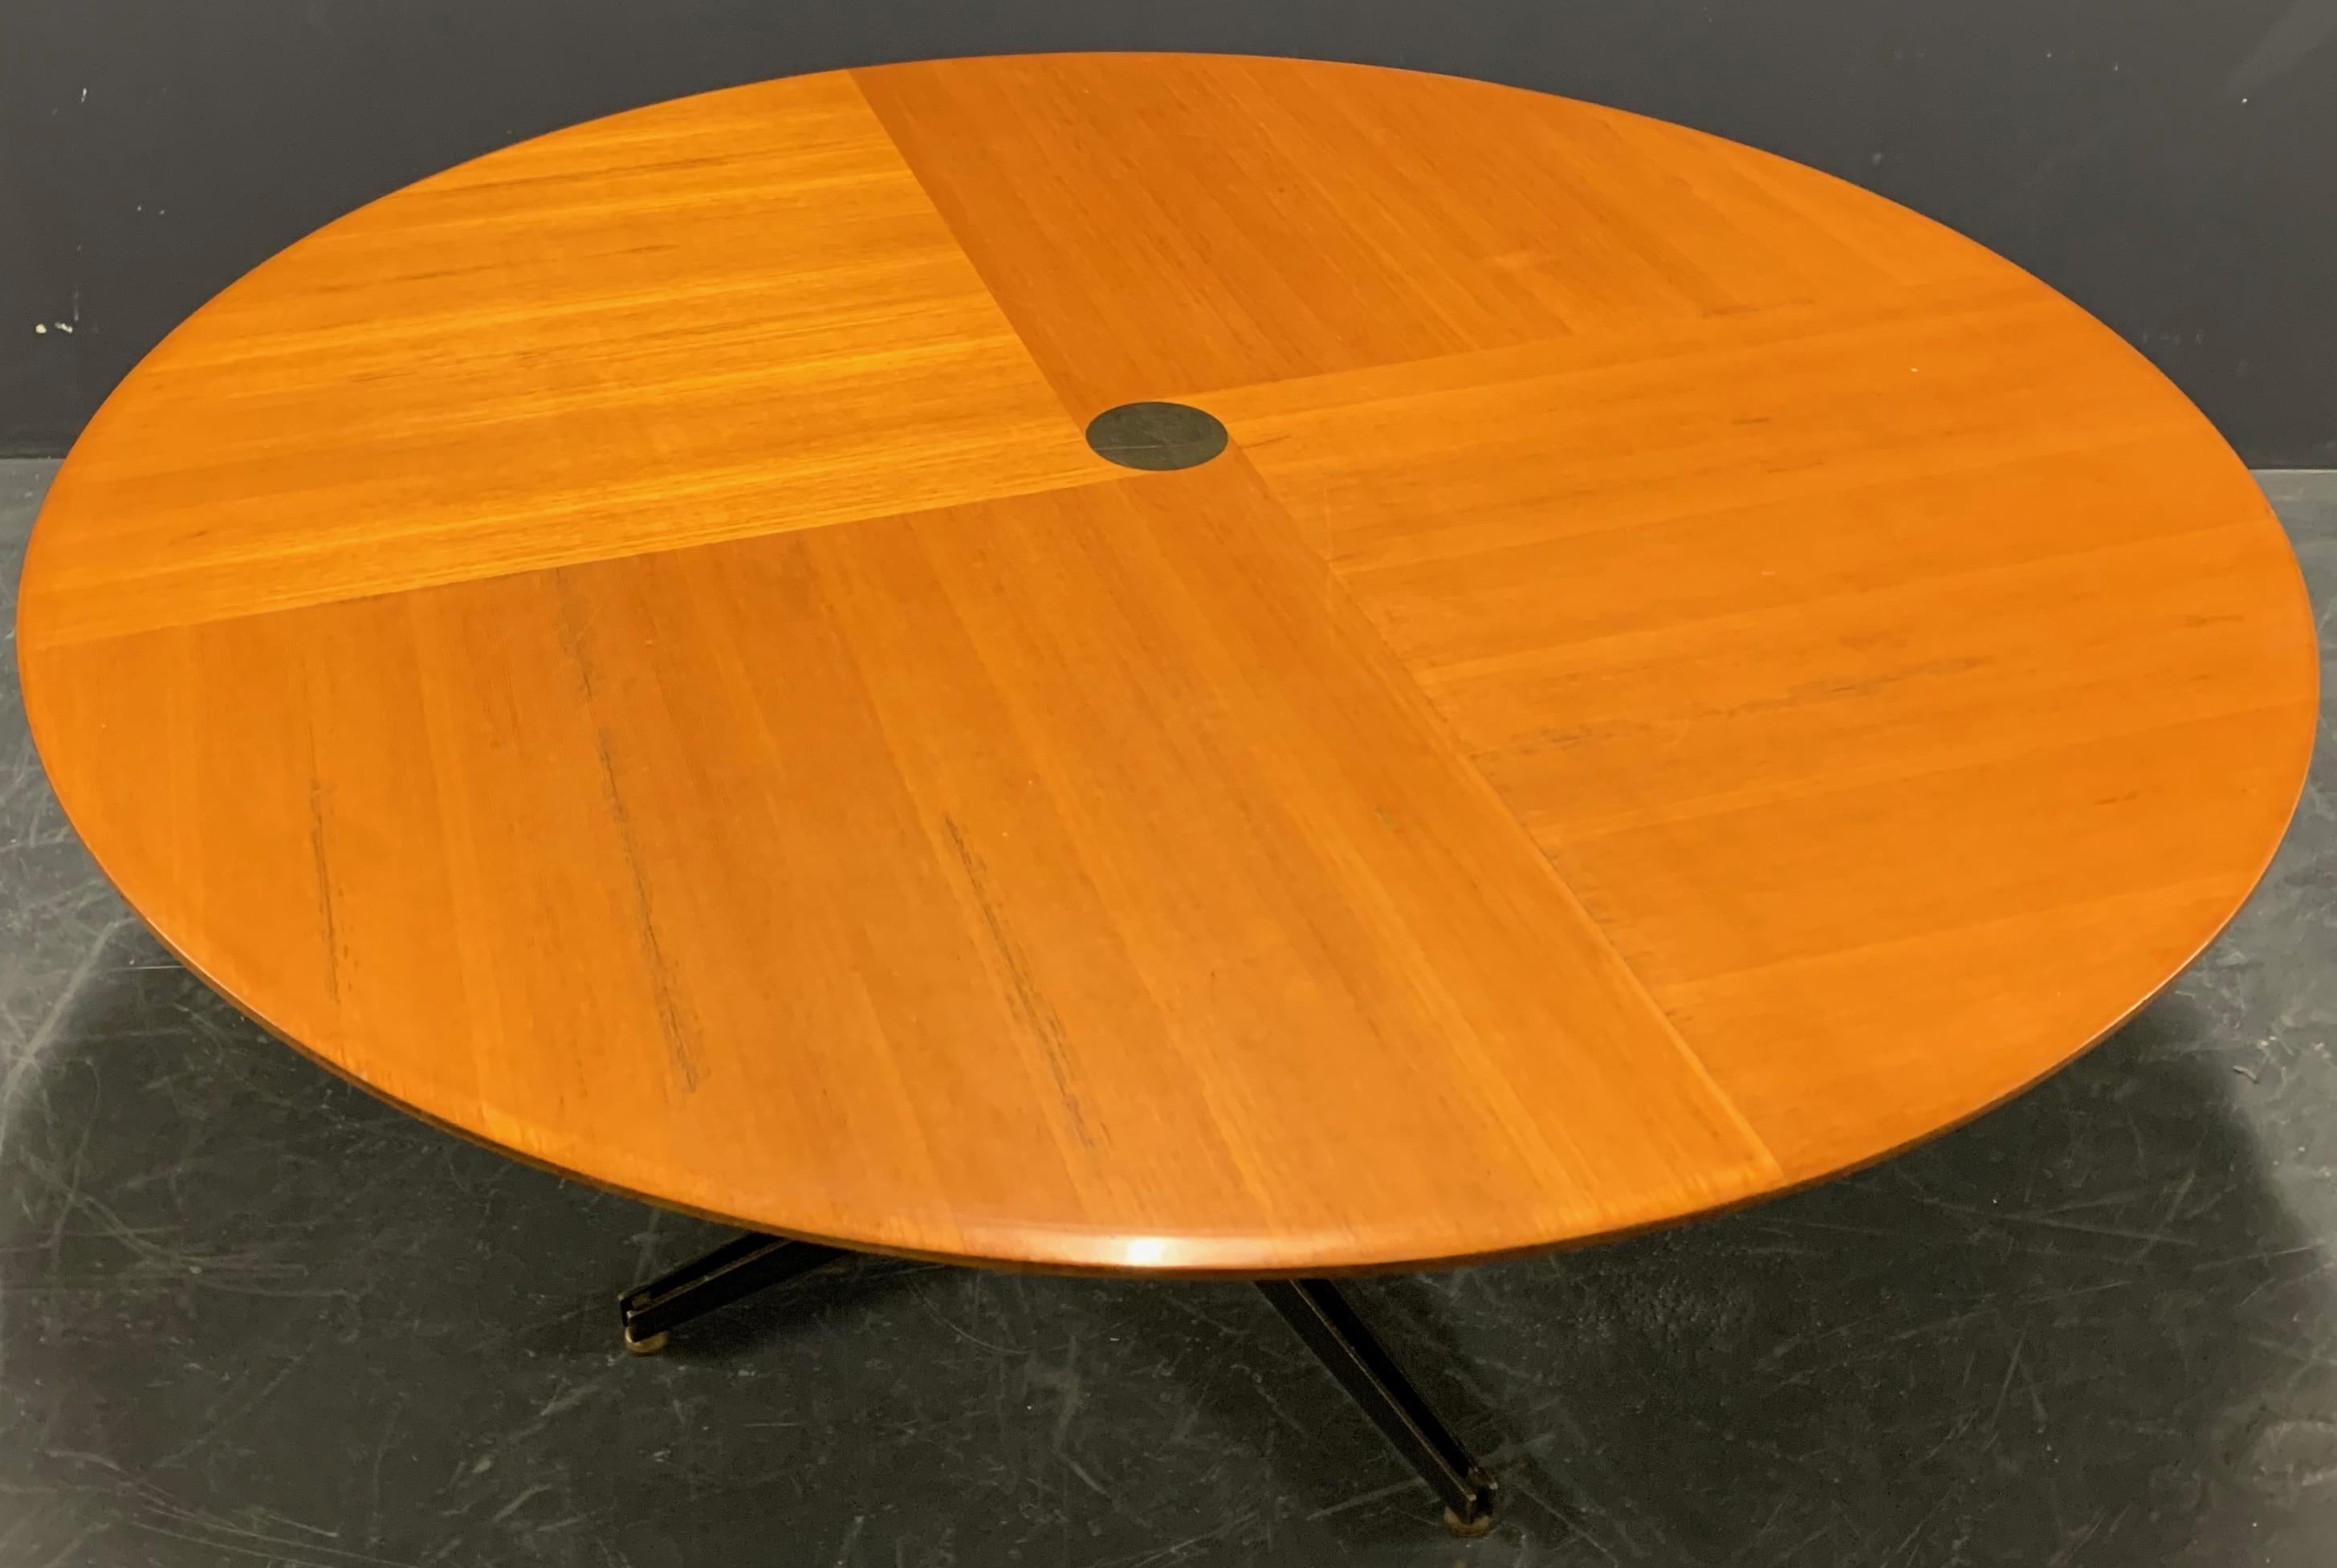 For tecno/ Italy. Wonderful height adjustable table. Can be used in every high between 50 and 77cm. Remarkable table top with amazing veneer.